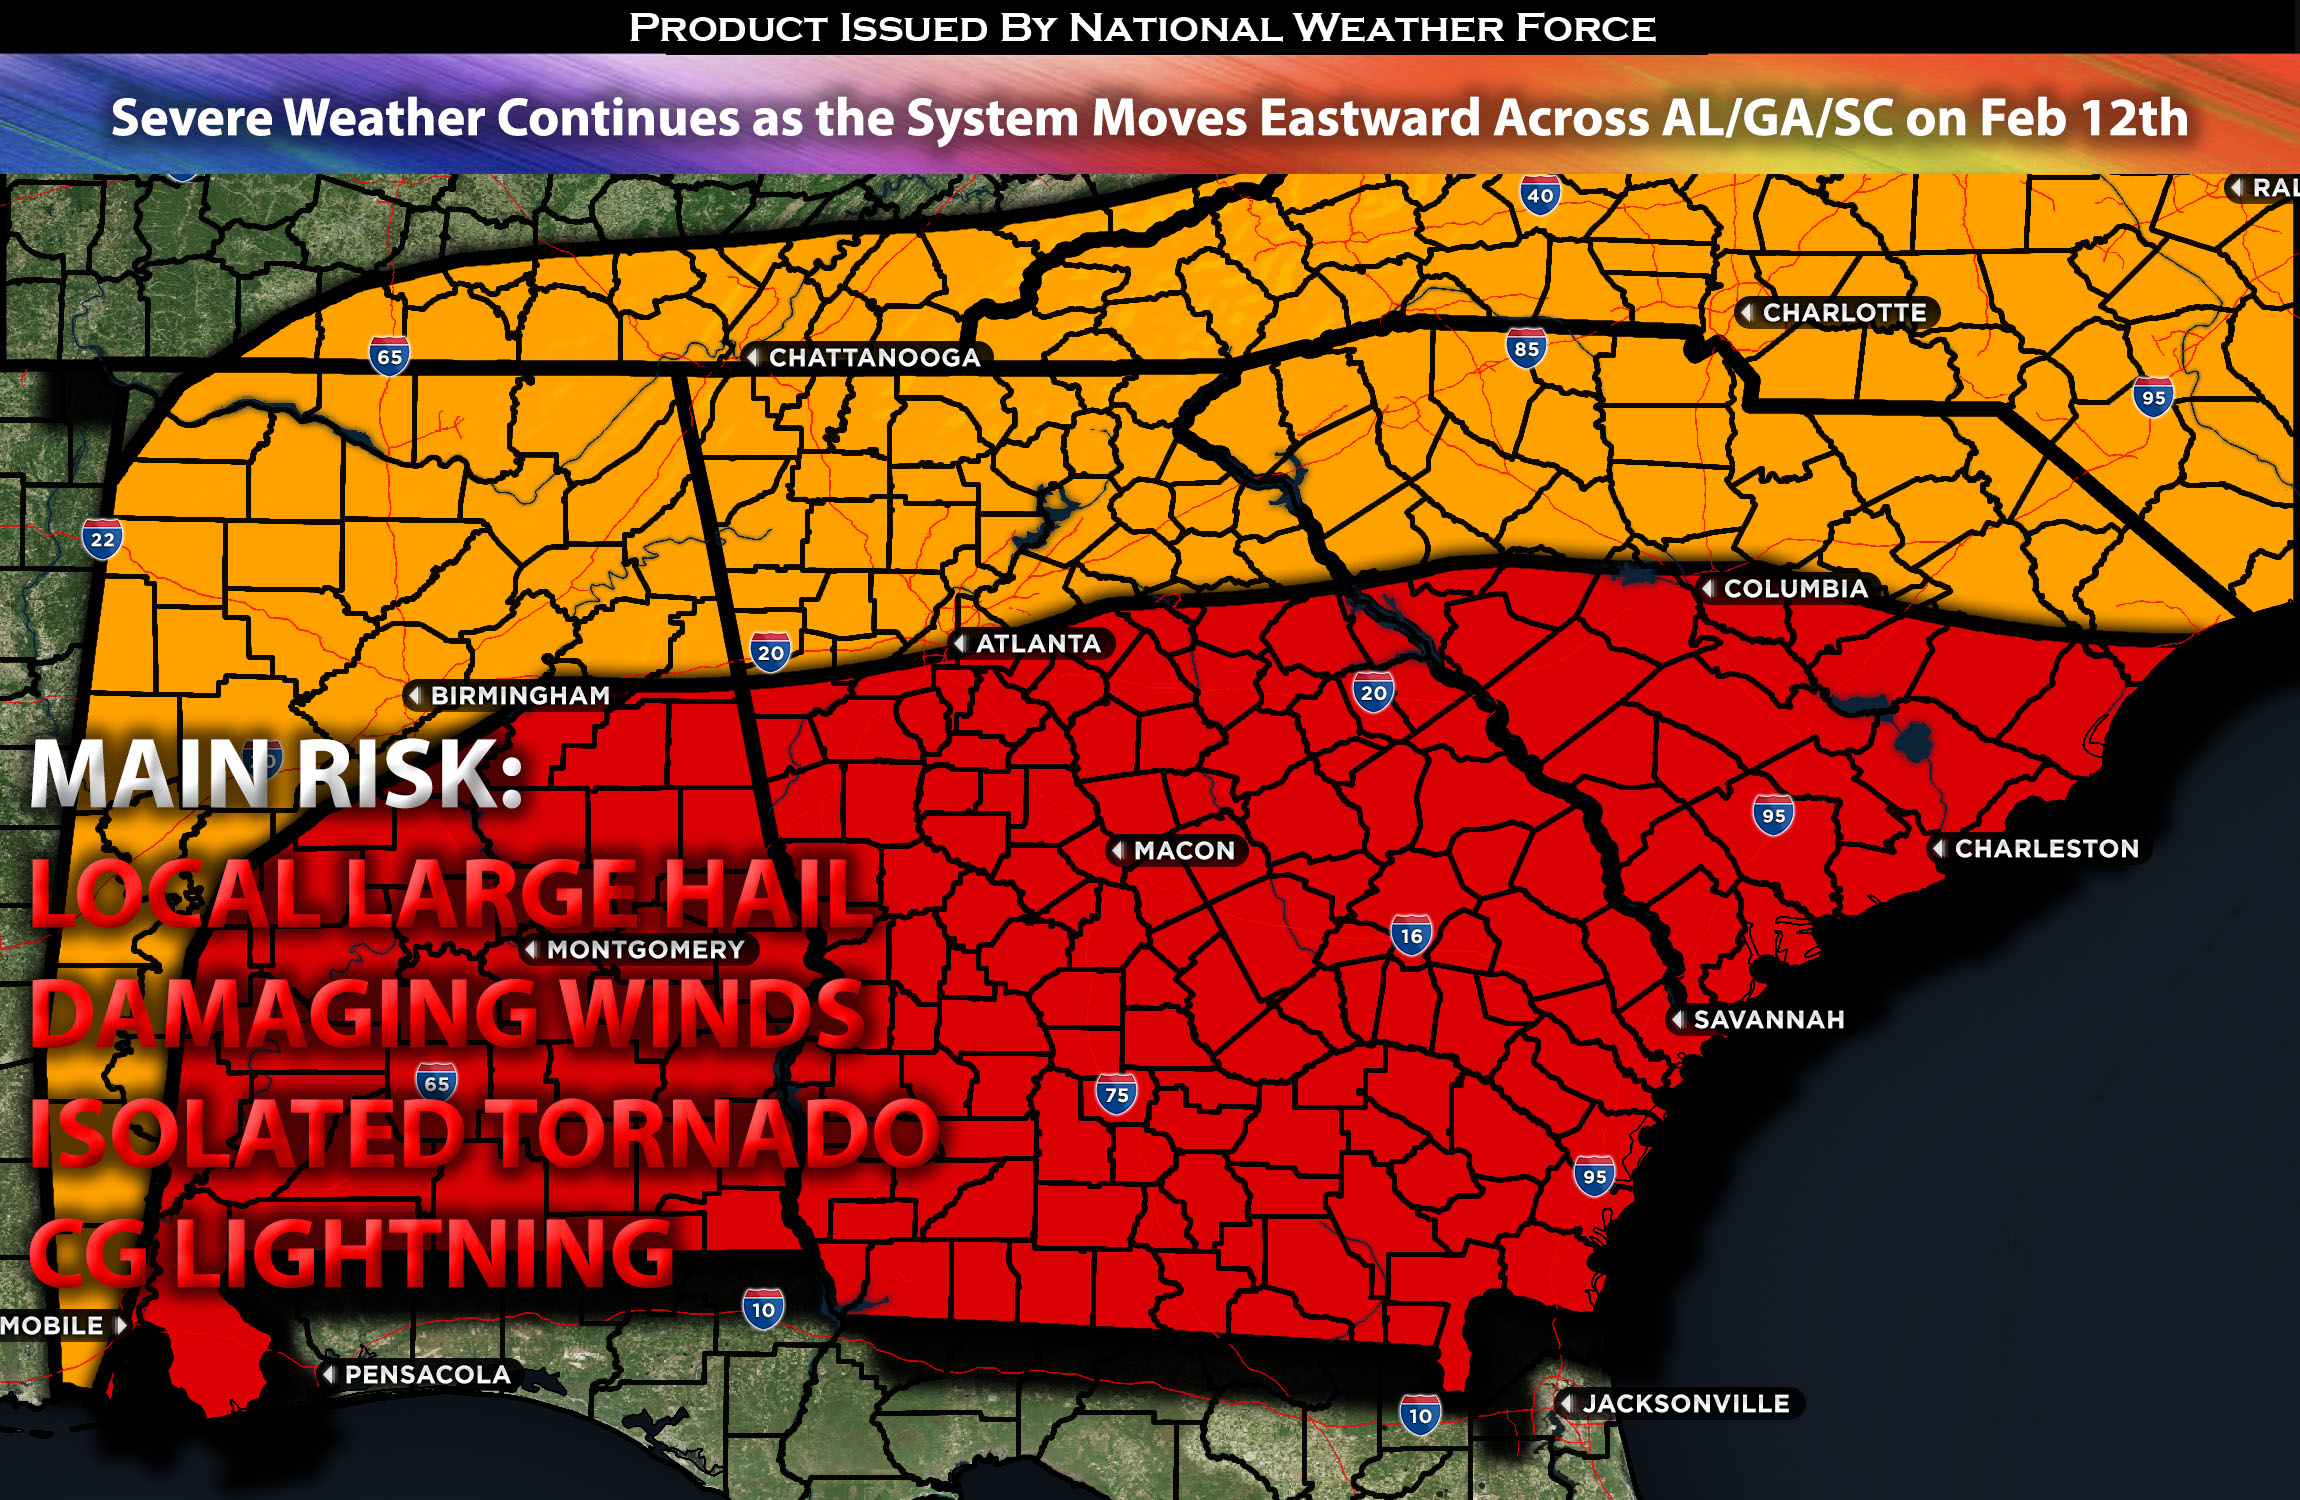 Severe Weather Continues as the System Moves Eastward Across AL/GA/SC on Feb 12th